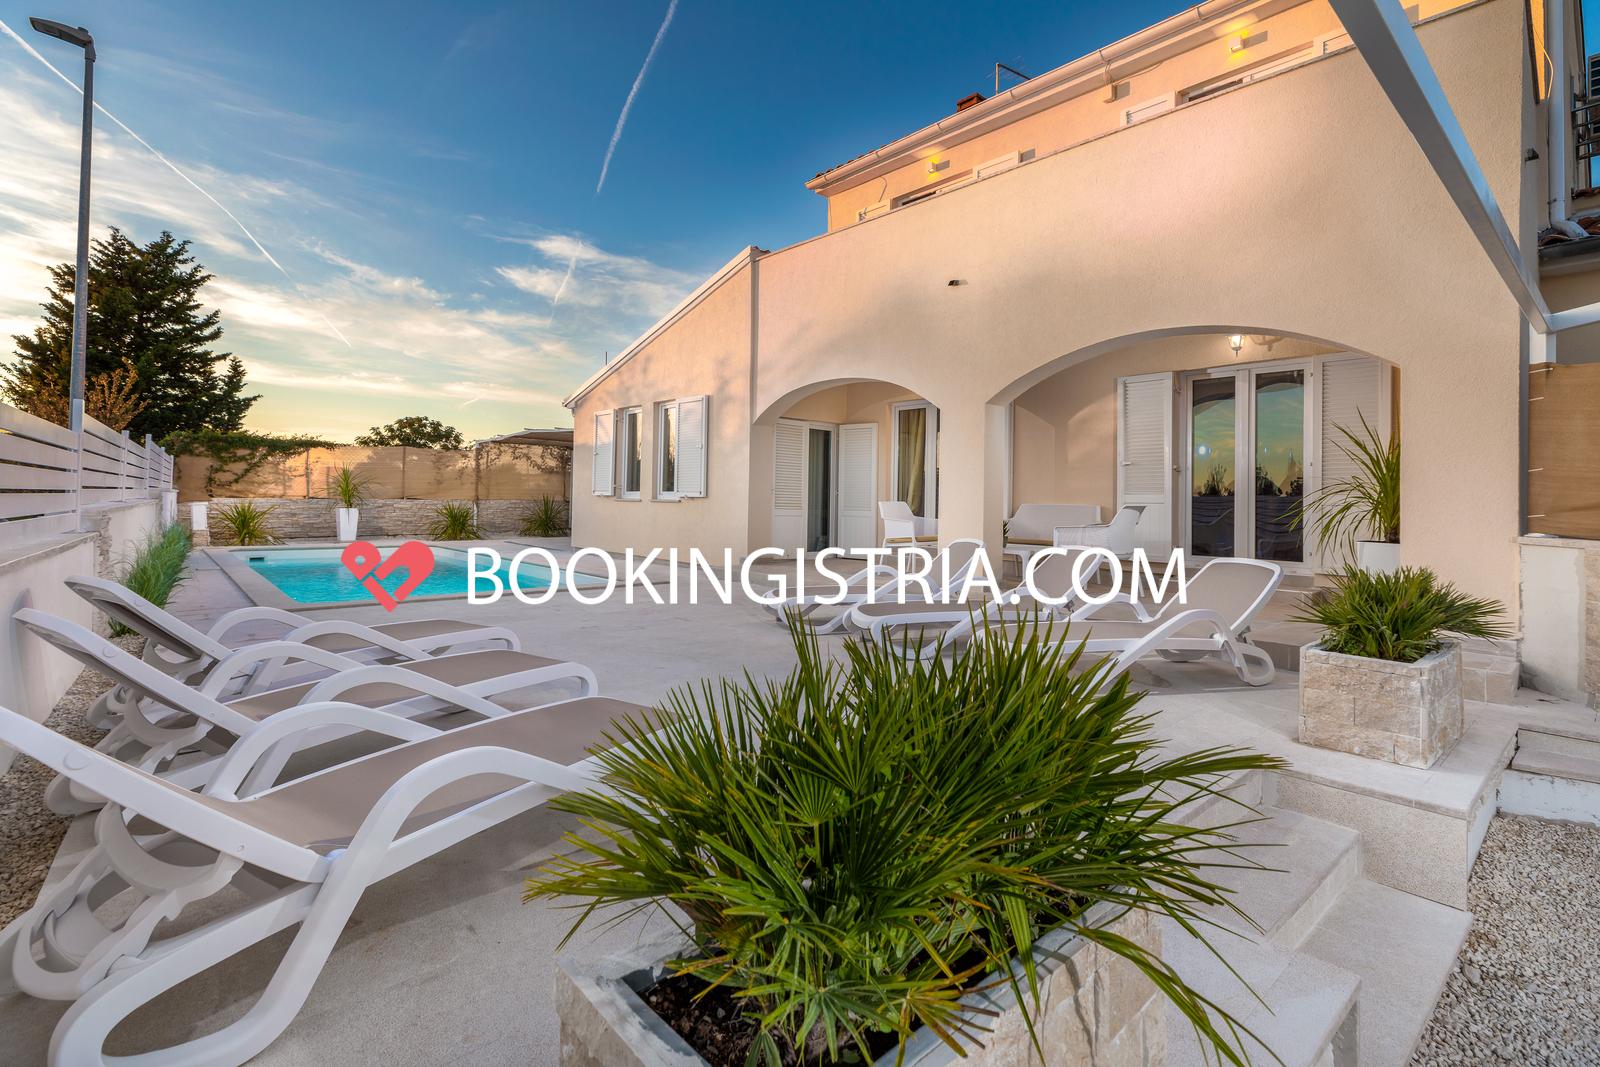 booking istria